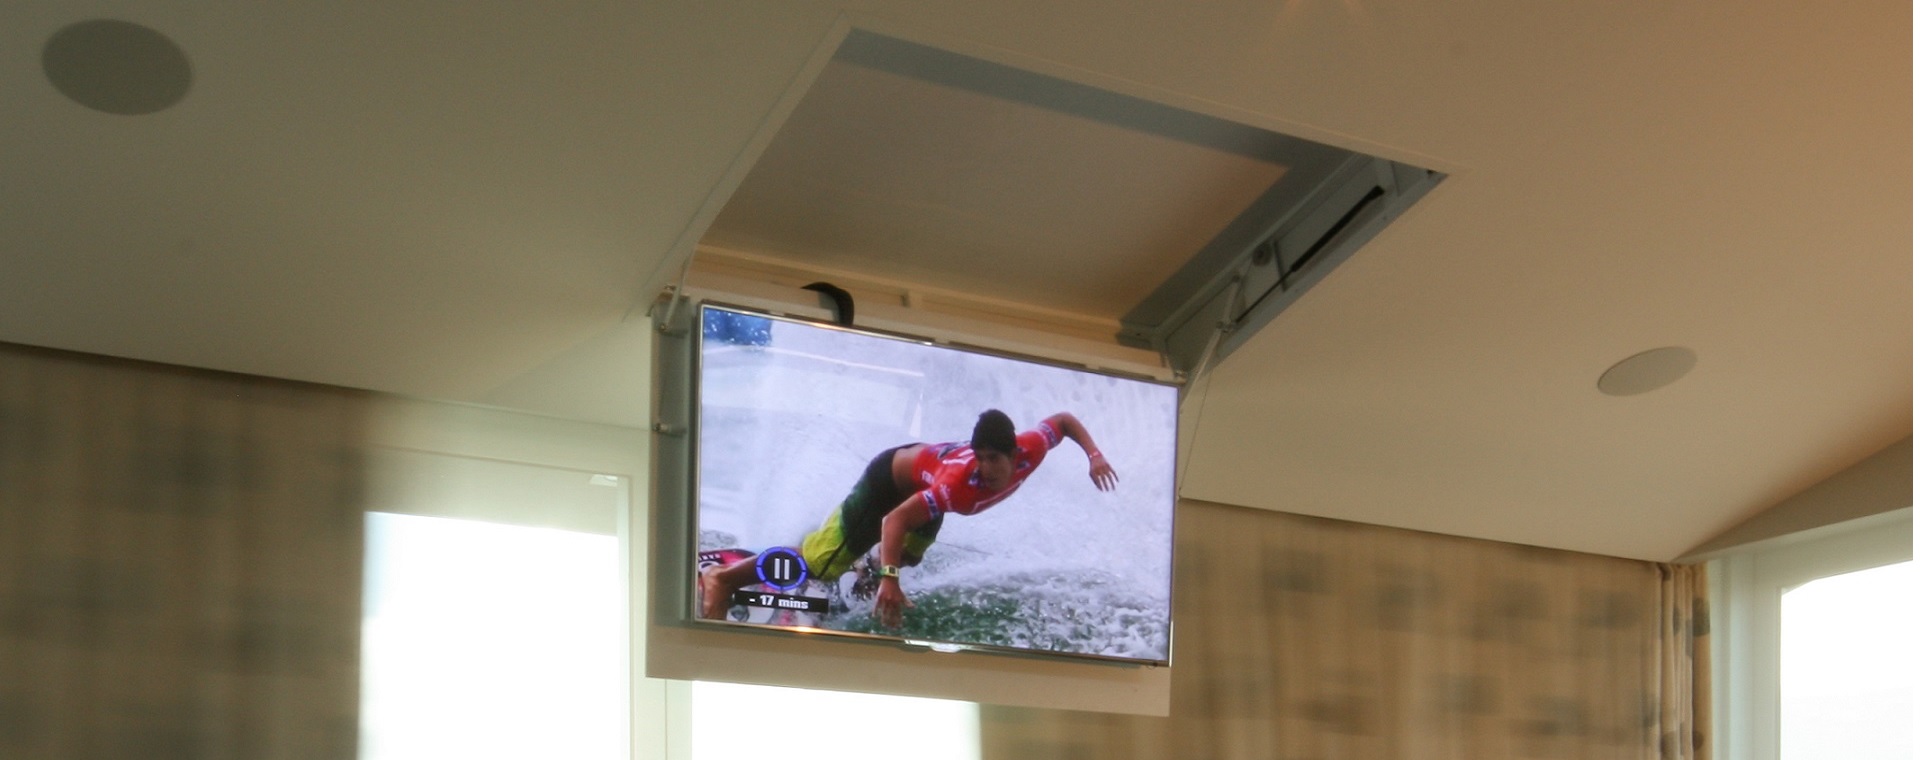 TV screen on a screen dropper showing a surfer, in a bedroom with in-ceiling speakers